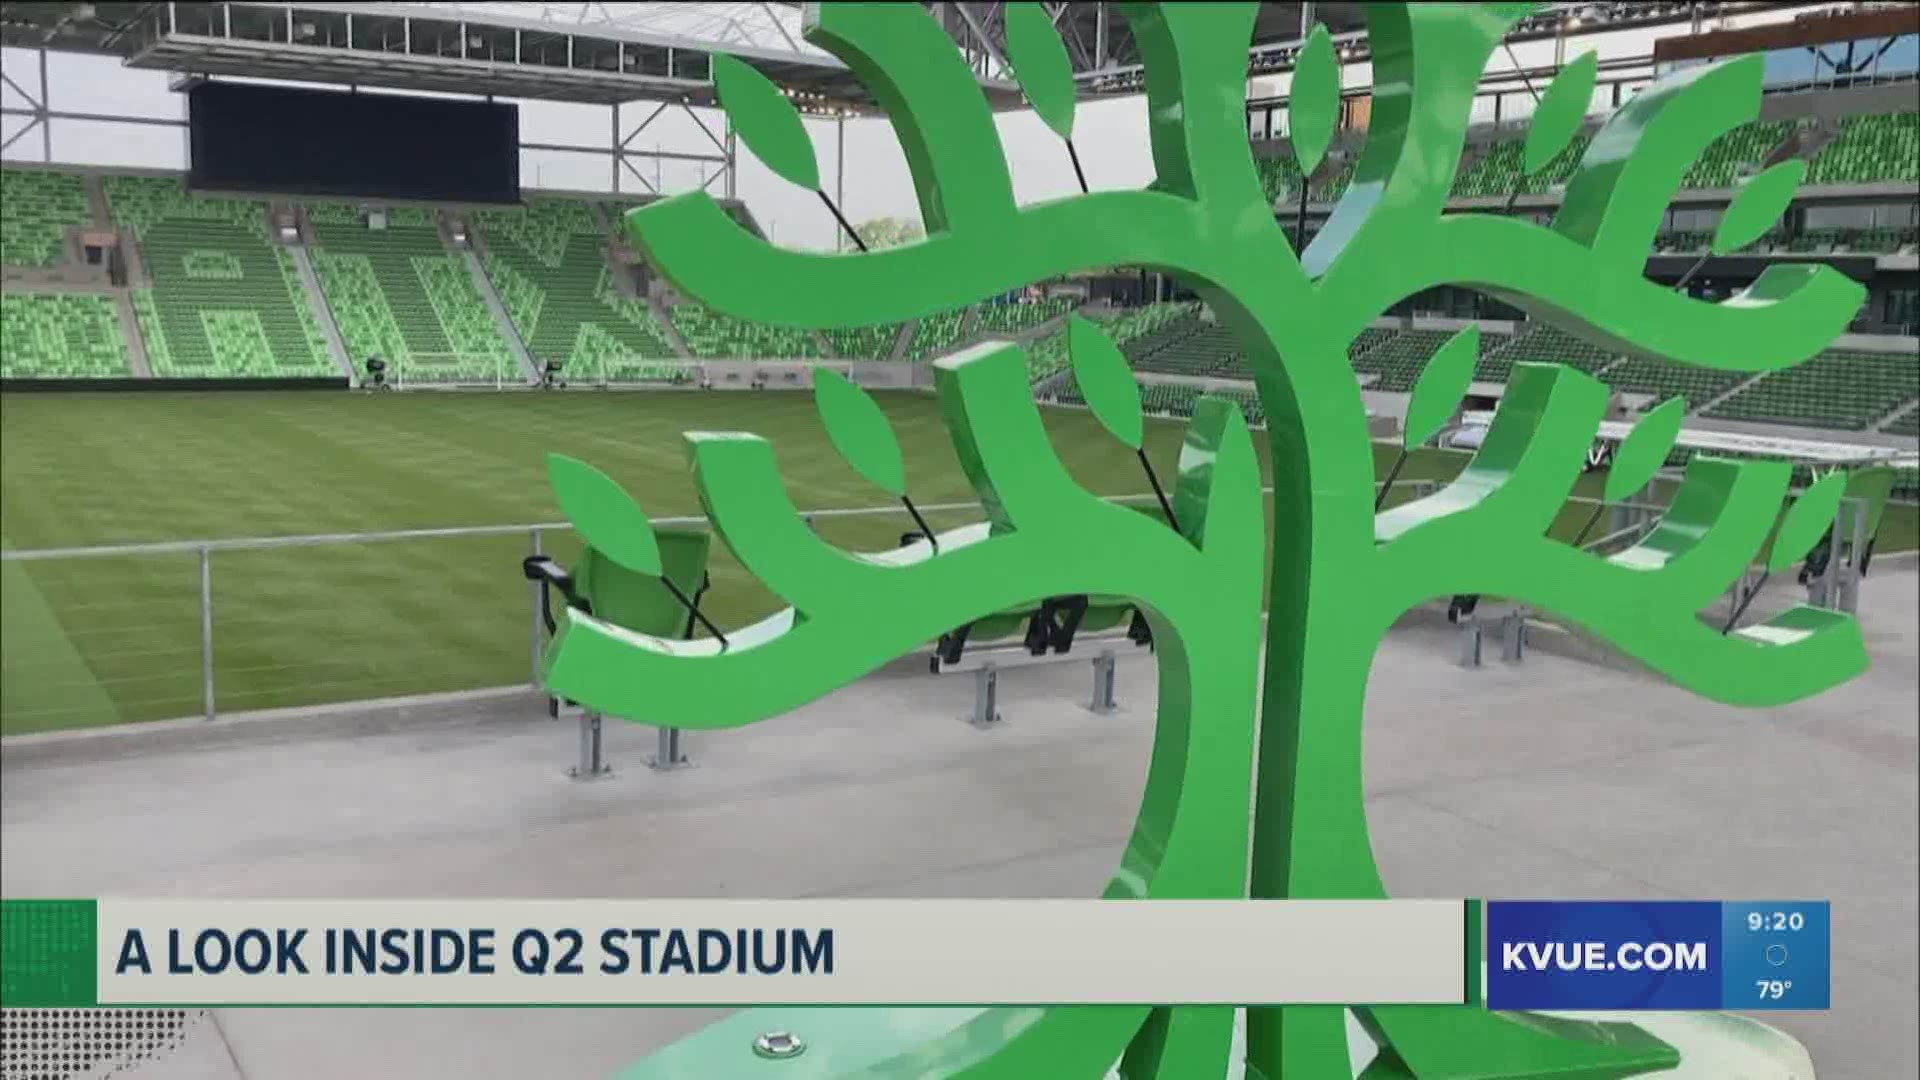 Austin FC President Andy Loughnane showed KVUE an exclusive behind-the-scenes look at Q2 Stadium.